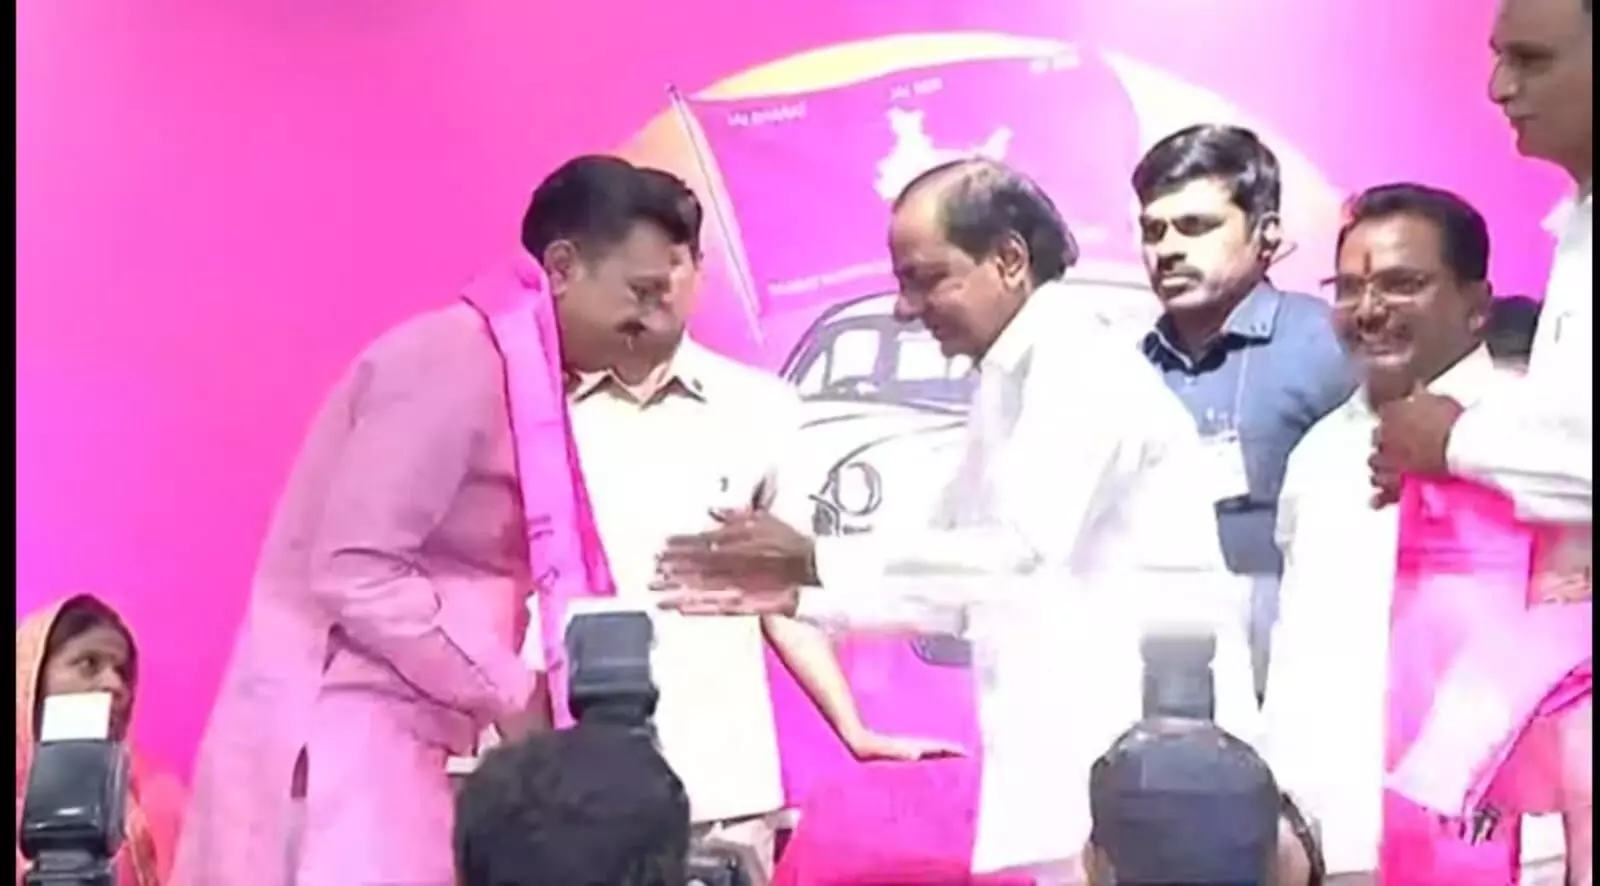 KCR welcomes BJP corporator, followers from Solapur into BRS